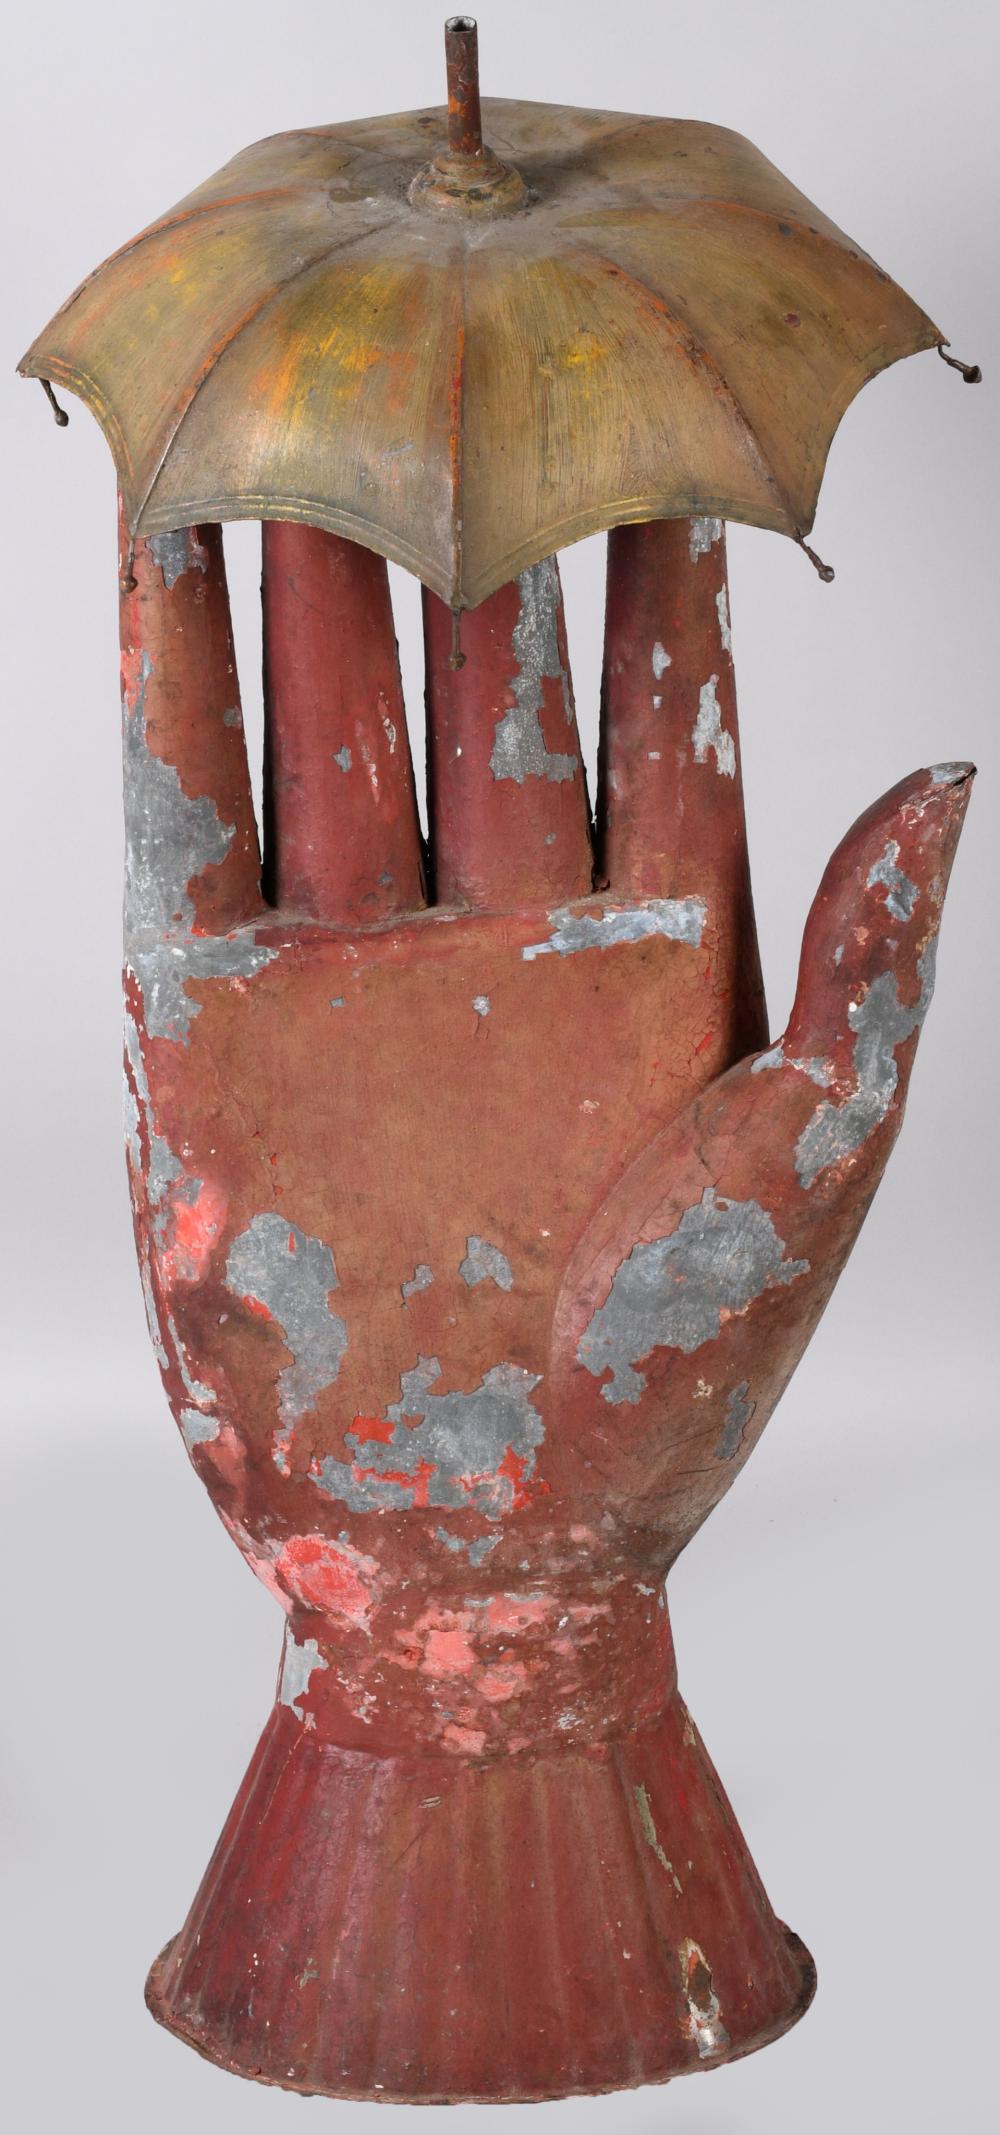 PAINTED METAL GLOVED HAND TRADE 33d61d